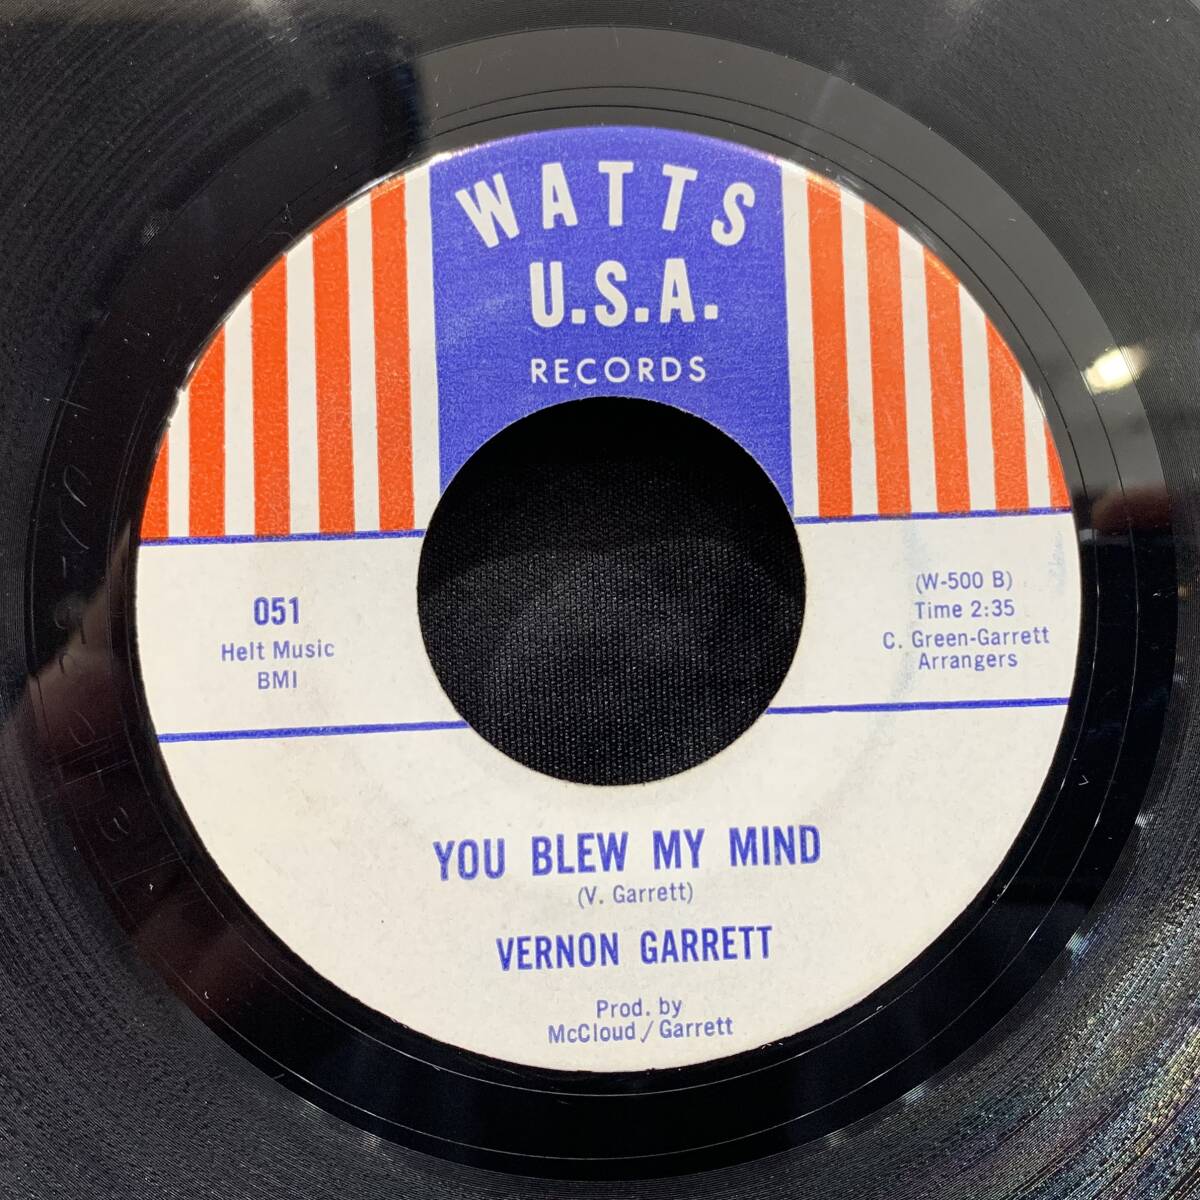 【EP】Vernon Garrett - We People In The Ghetto / You Blew My Mind 1970年USオリジナル Watts U.S.A. Records 050、051の画像2